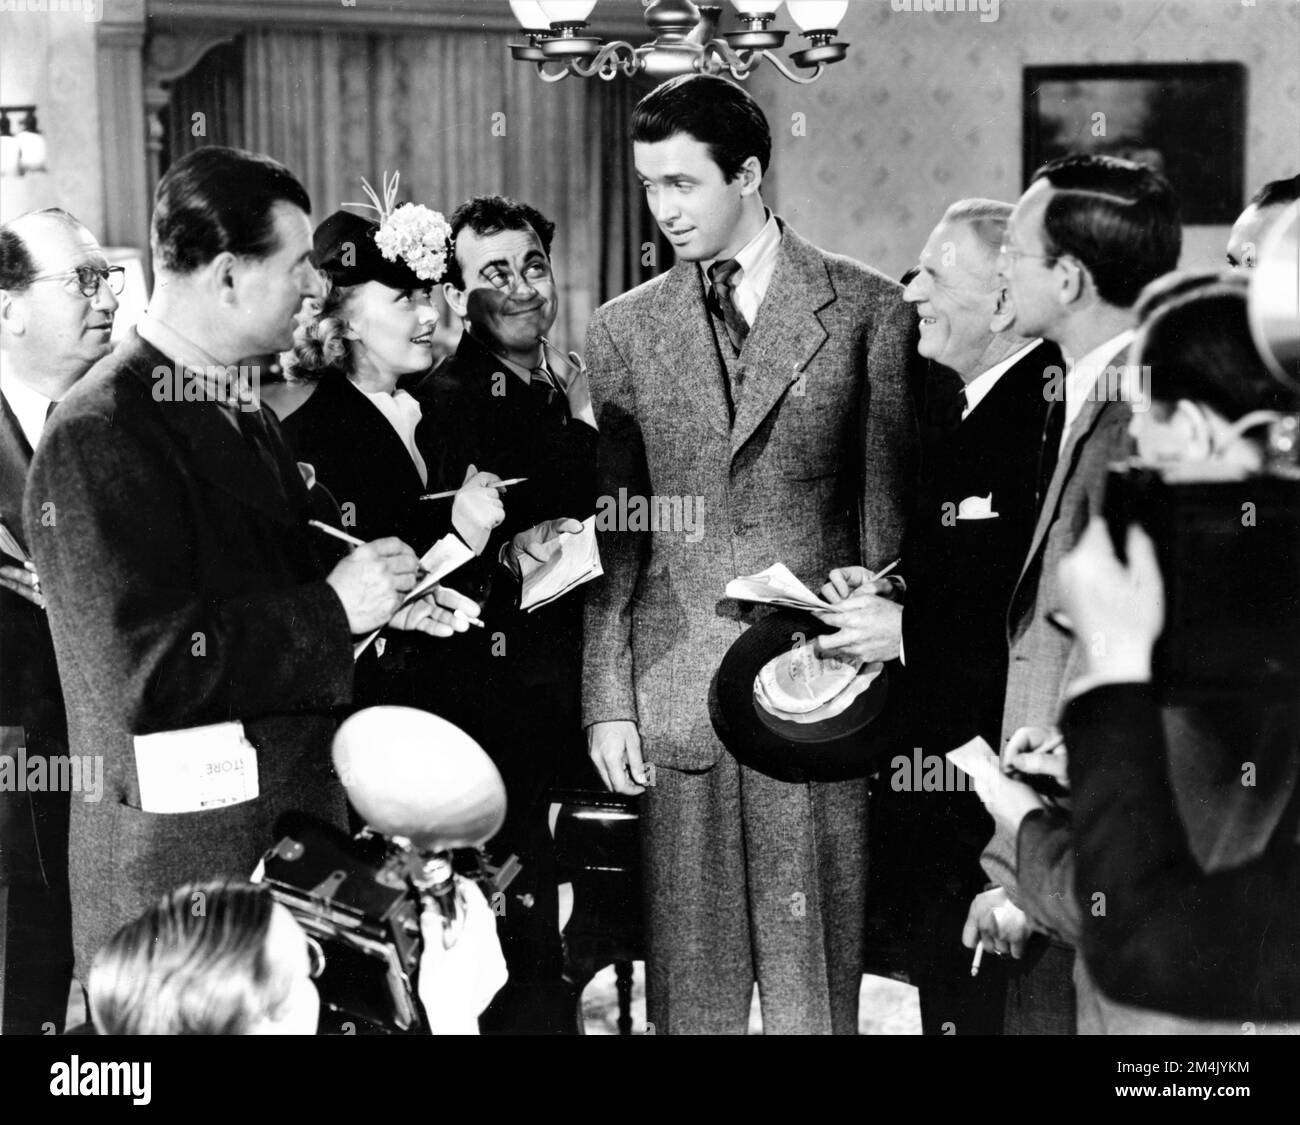 JAMES STEWART and CHARLES LANE in MR. SMITH GOES TO WASHINGTON 1939 director FRANK CAPRA story Lewis R. Foster screenplay Sidney Buchman music Dimitri Tiomkin Columbia Pictures Stock Photo